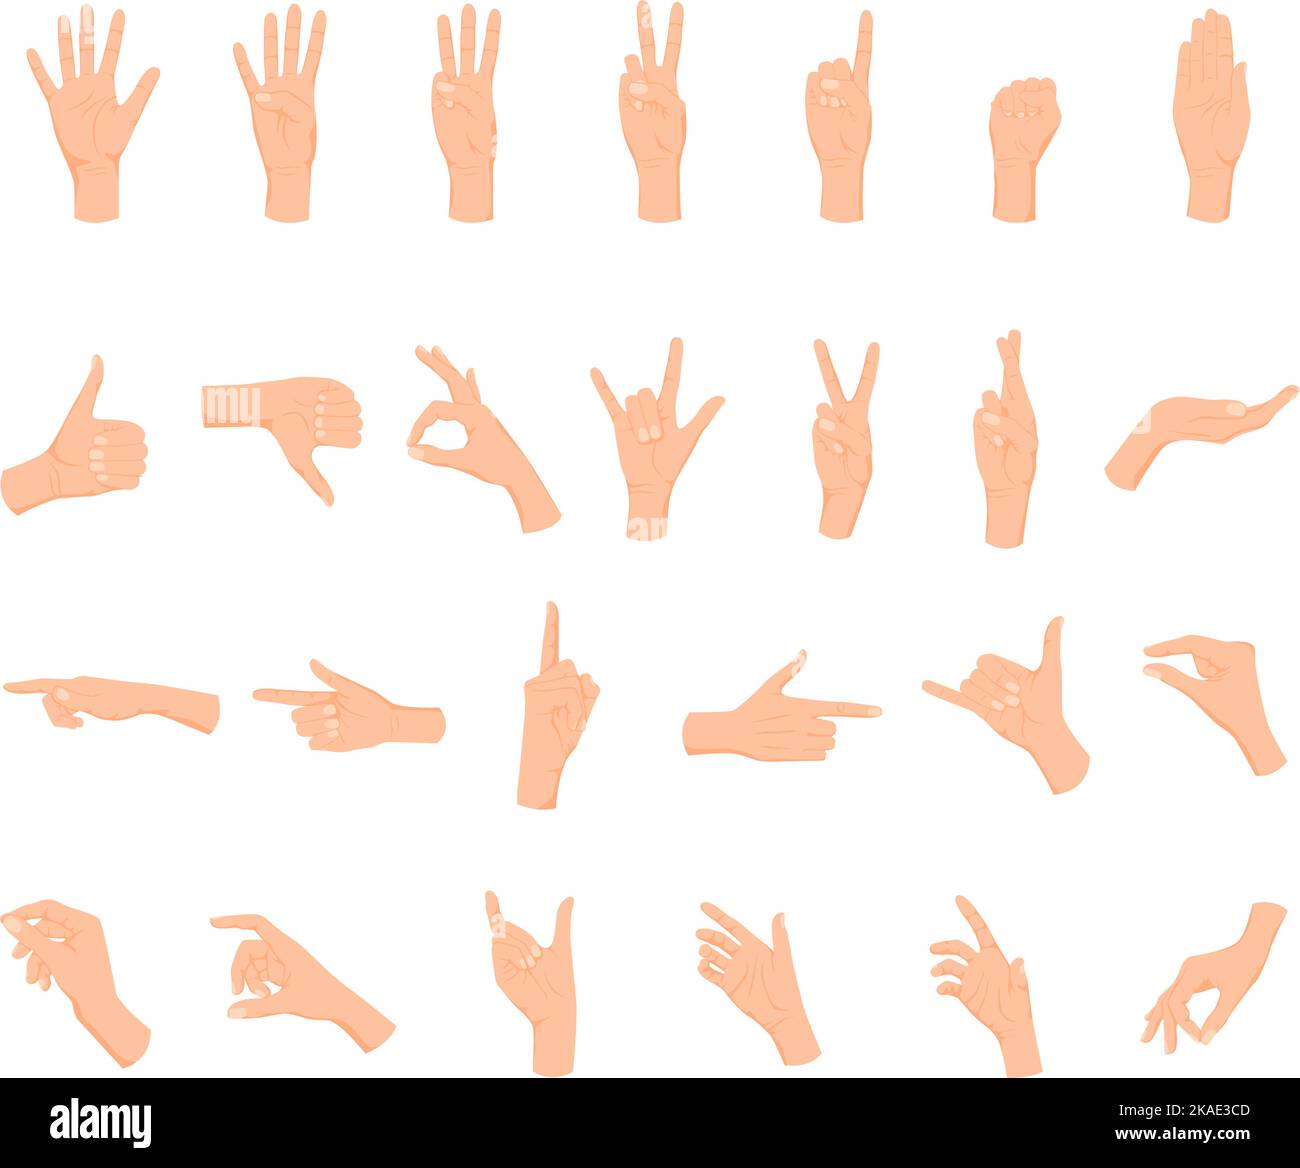 Human hands gestures set with flat isolated icons of palm hands with crossed fingers various shapes vector illustration Stock Vector